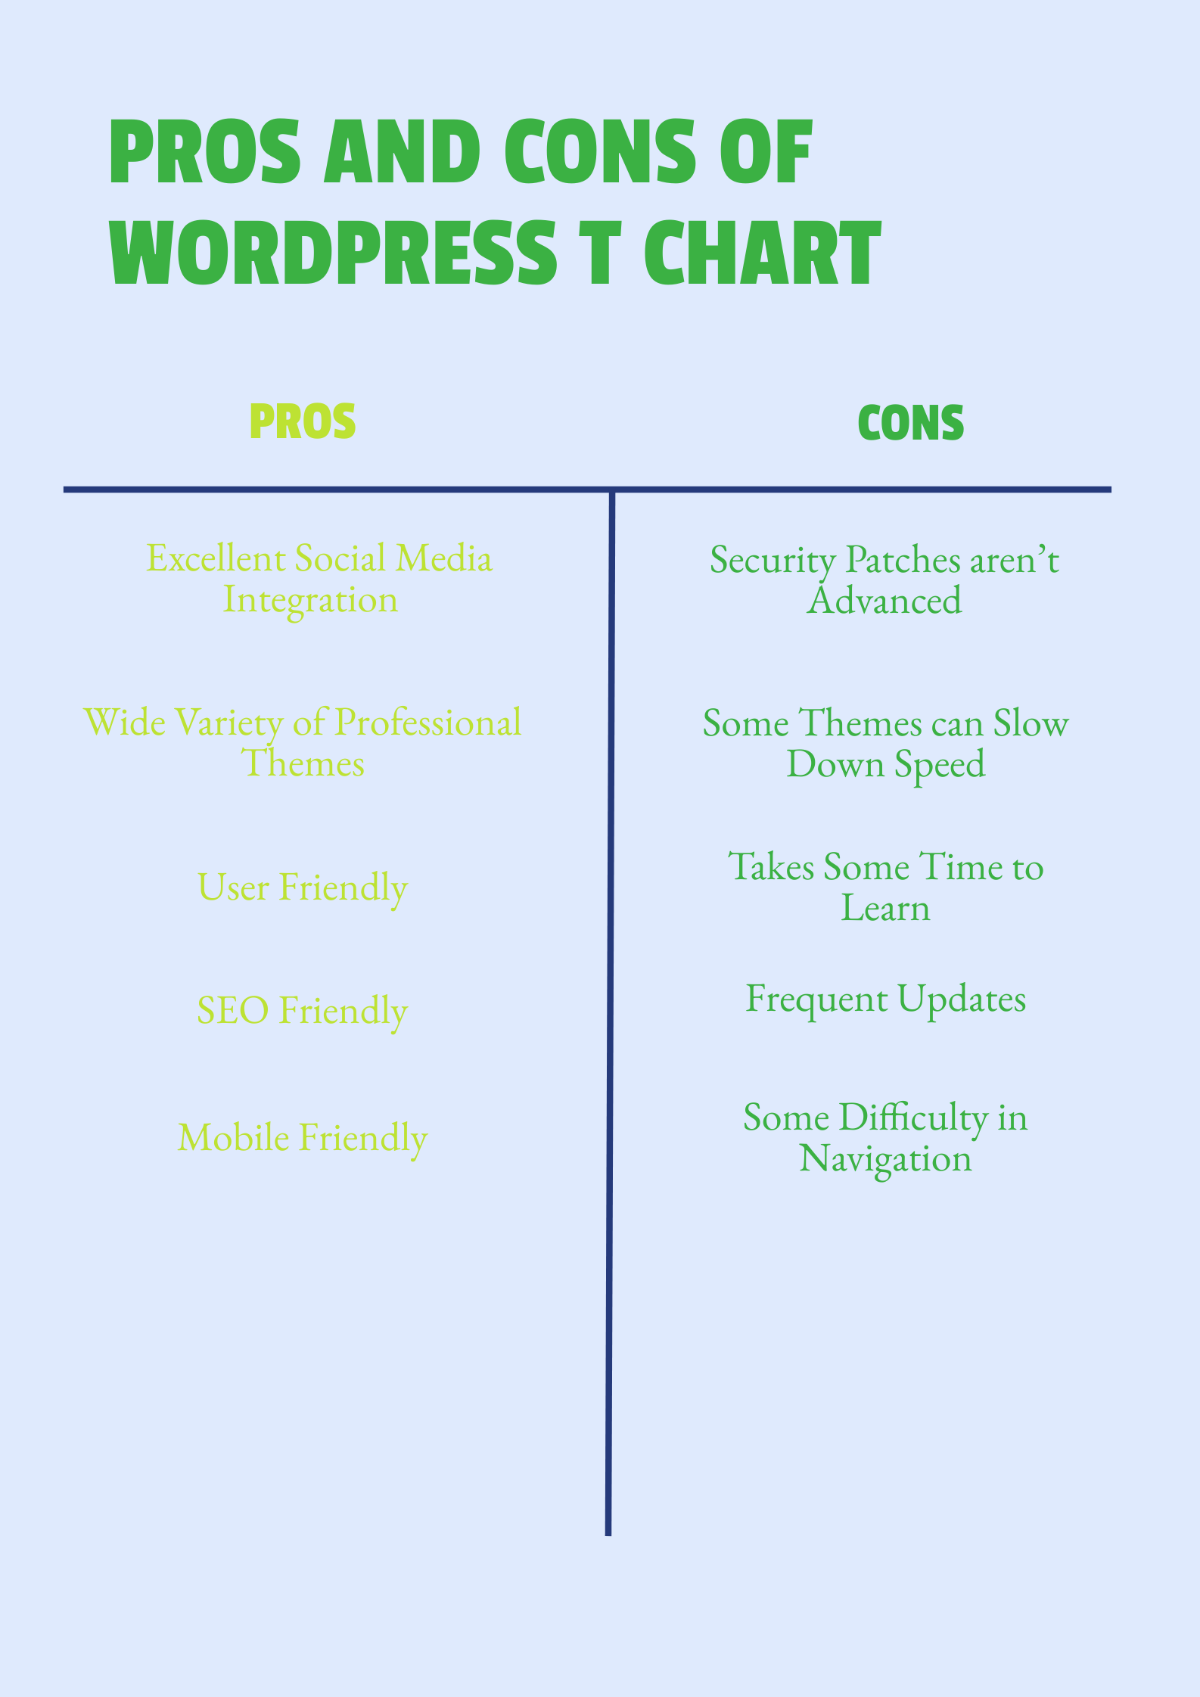 Pros and Cons of WordPress T-Chart